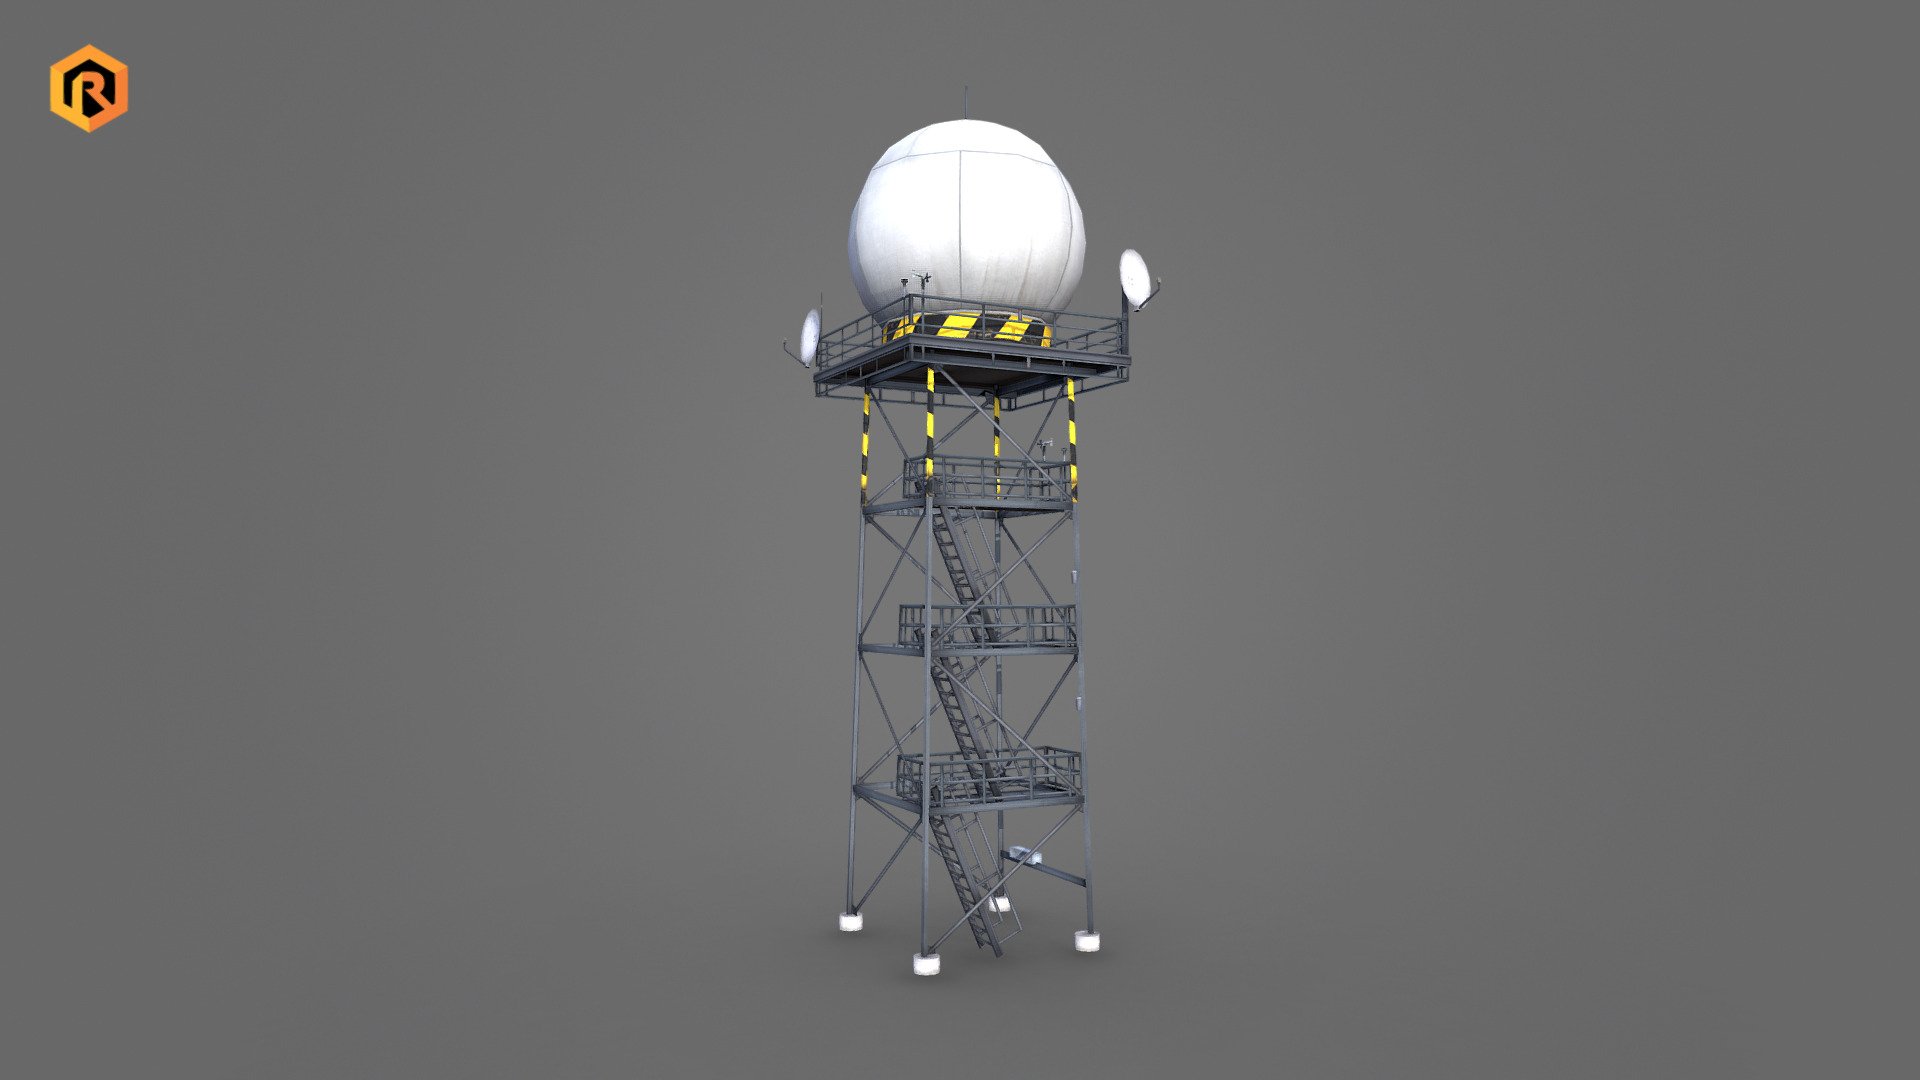 Low-poly 3D model of Radar Tower.

It is best for use in games and other VR / AR, real-time applications such as Unity or Unreal Engine.

It can also be rendered in Blender (ex Cycles) or Vray as the model is equipped with proper textures.  

You can also buy this model in a bundle: https://skfb.ly/ovQJB

Technical details:

- 2048 x 2048 Diffuse and AO texture set

- 1998 Triangles

- 1577 Vertices

- Model is one mesh.

- Model completely unwrapped.

- Pivot point centered at world origin.

- All nodes, materials and textures are appropriately named
- Lot of additional file formats included (Blender, Unity, Maya etc.)

More file formats are available in additional zip file on product page.

Please feel free to contact me if you have any questions or need any support for this asset.

Support e-mail: support@rescue3d.com - Weather Radar Tower - Buy Royalty Free 3D model by Rescue3D Assets (@rescue3d) 3d model